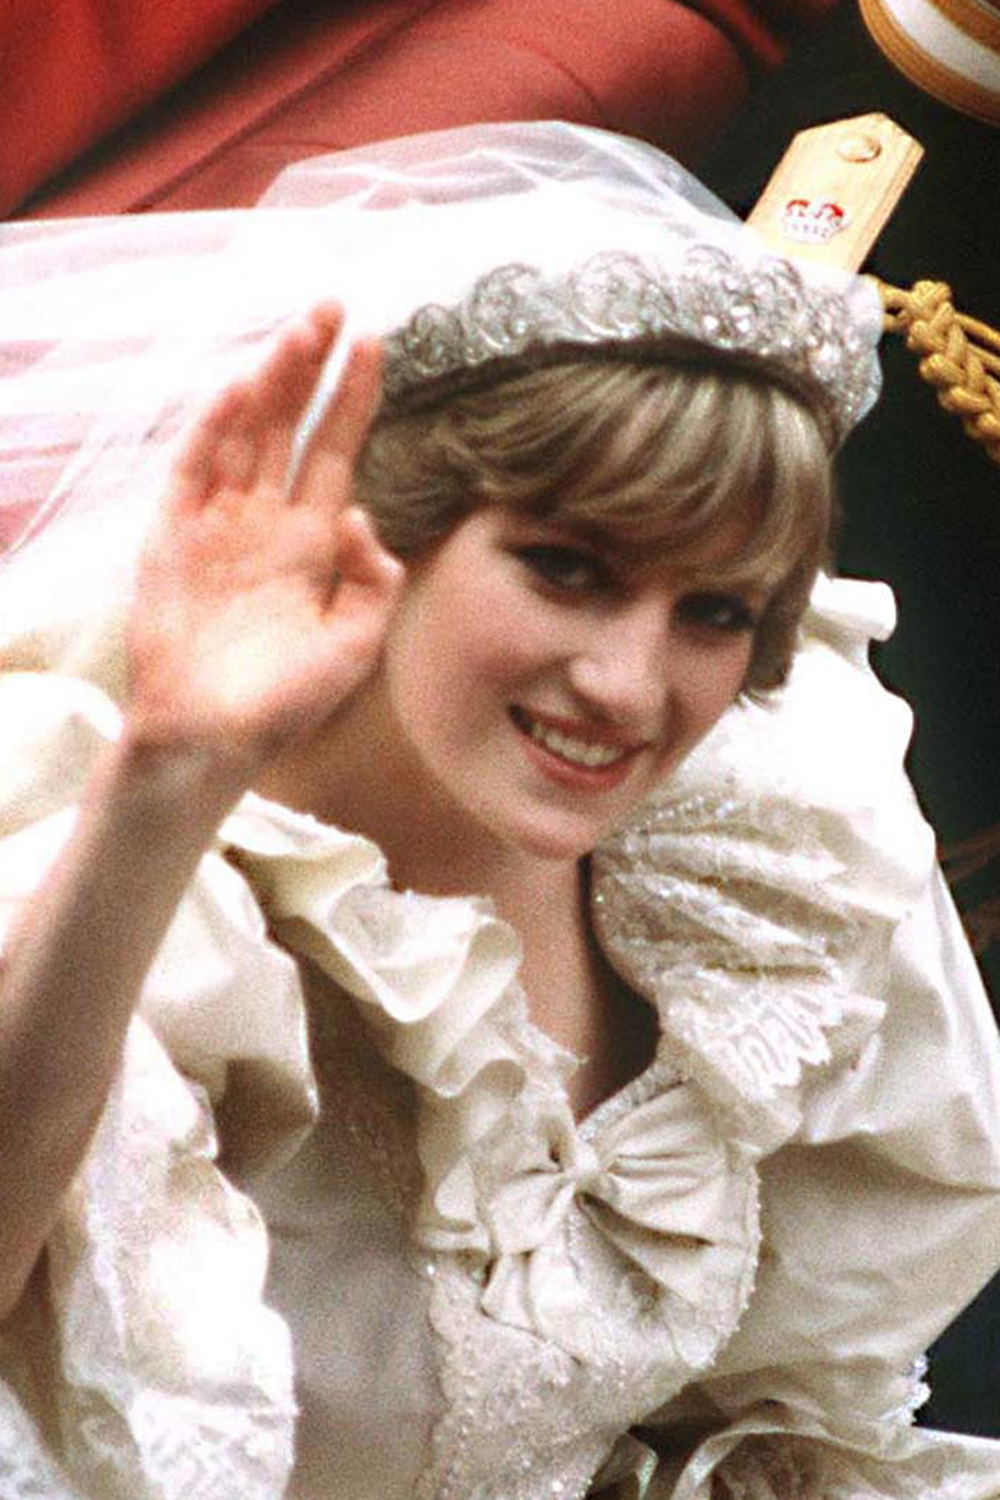 trust me, now is the time to take short hair inspiration from princess diana—here are her best looks ever